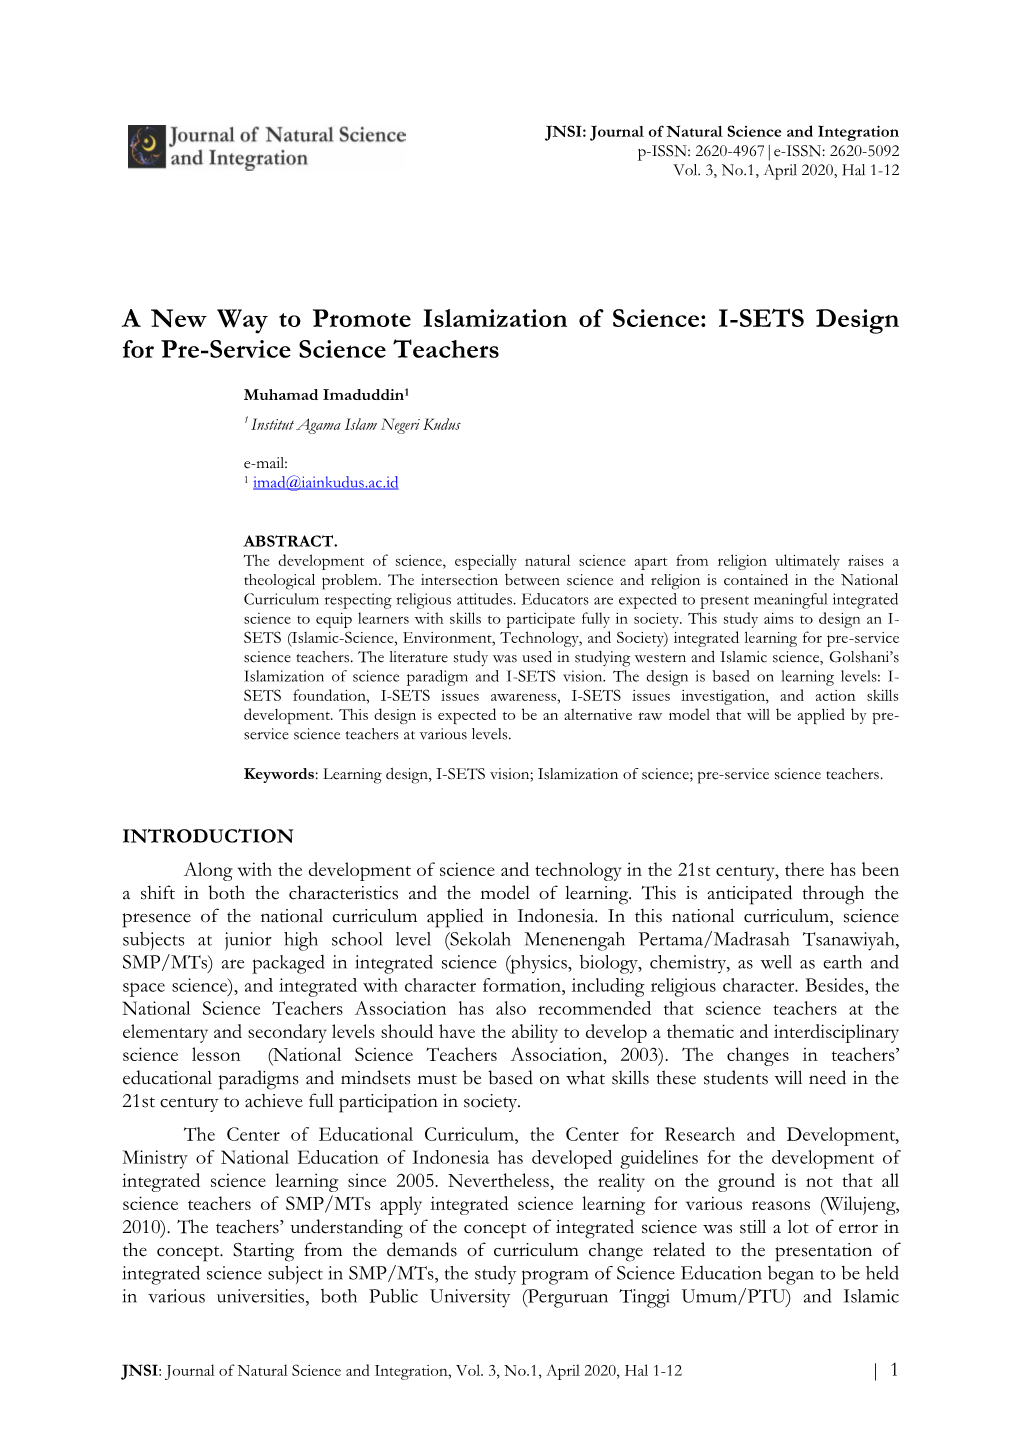 A New Way to Promote Islamization of Science: I-SETS Design for Pre-Service Science Teachers